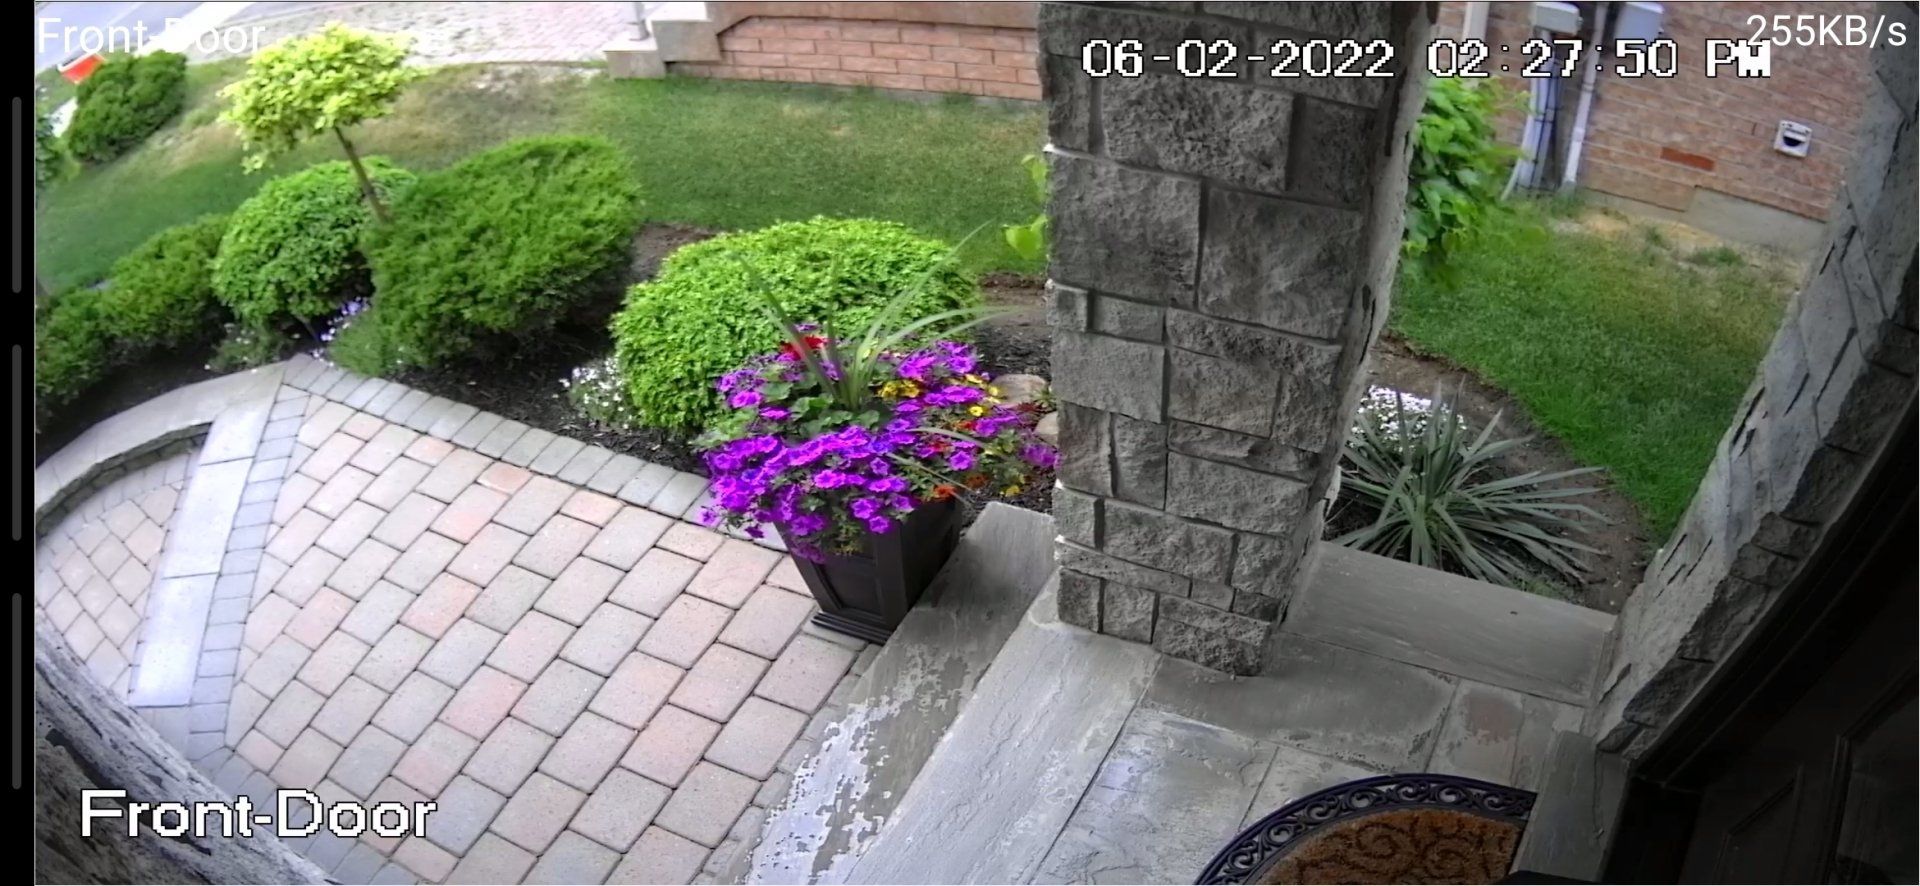 CCTV Front Porch view